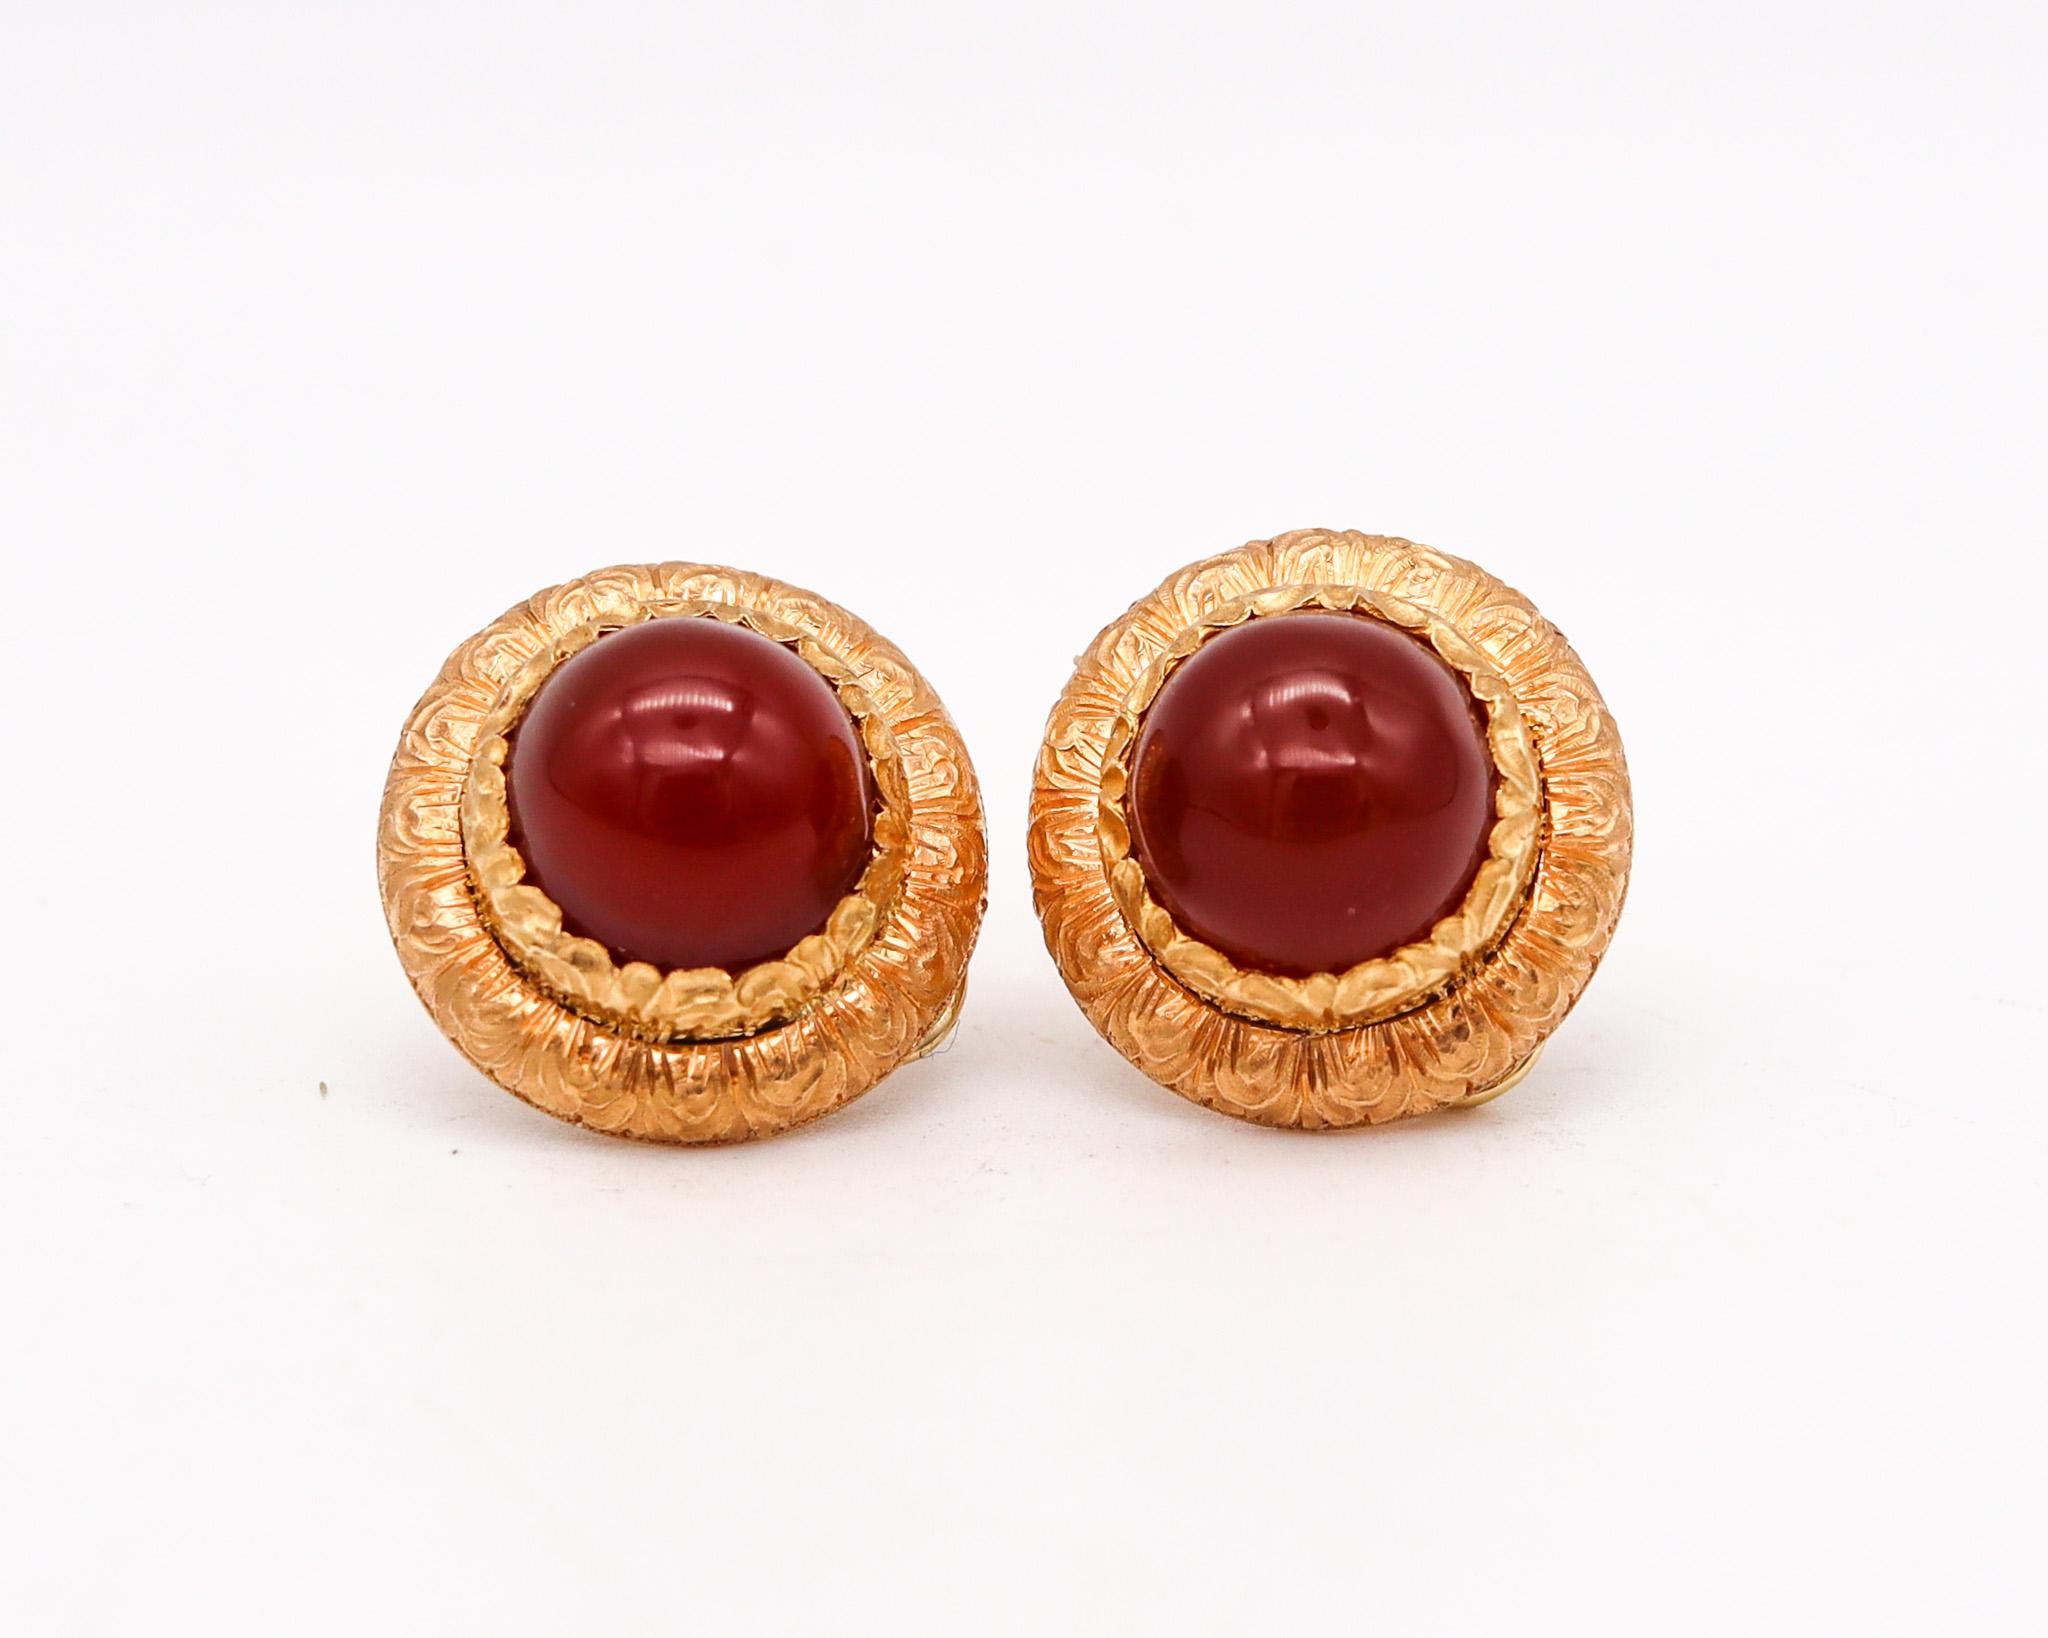 Pair of earrings designed by Cazzaniga.

An exceptional fine pair of earrings, created in Roma Italy by the jewelry house of Cazzaniga, back in the late 1970. This pair has been carefully crafted in round bombe shape, with intricate patterns of